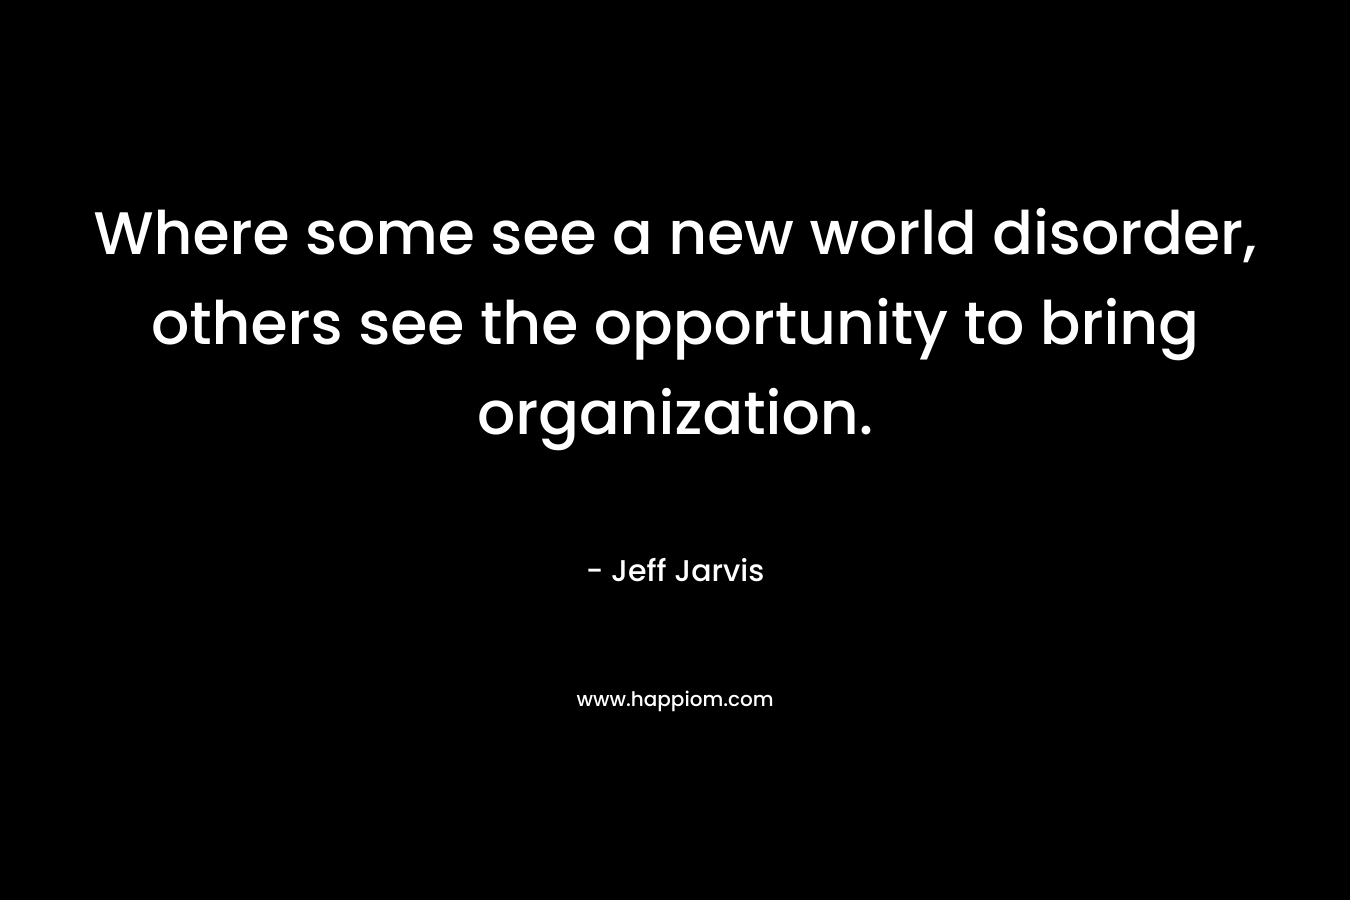 Where some see a new world disorder, others see the opportunity to bring organization. – Jeff Jarvis